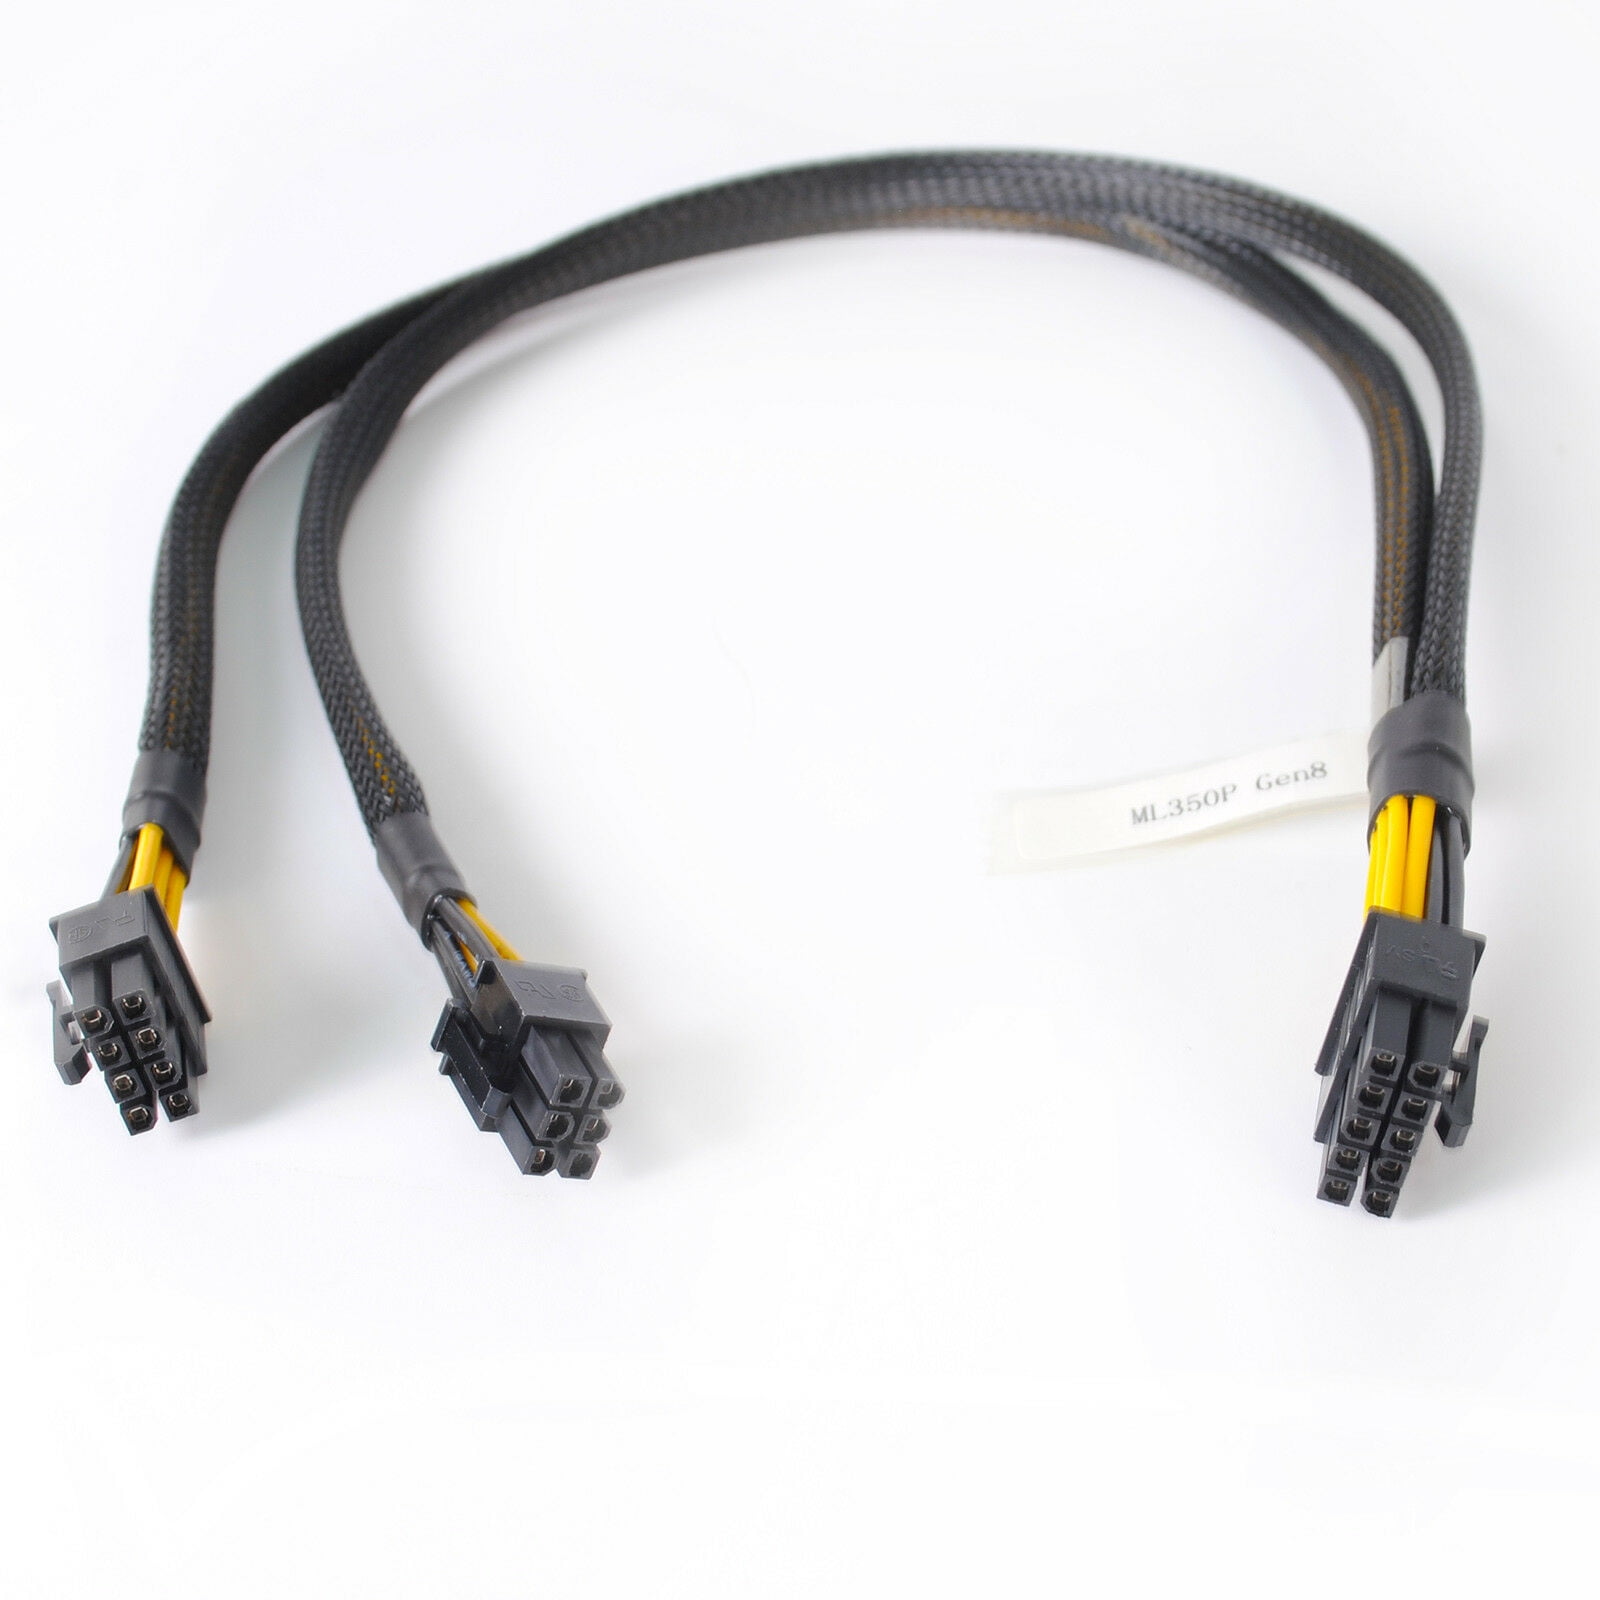 Drive Backplane Power Cable 10Pin to 10 Pin For ML350P G8 50cm 